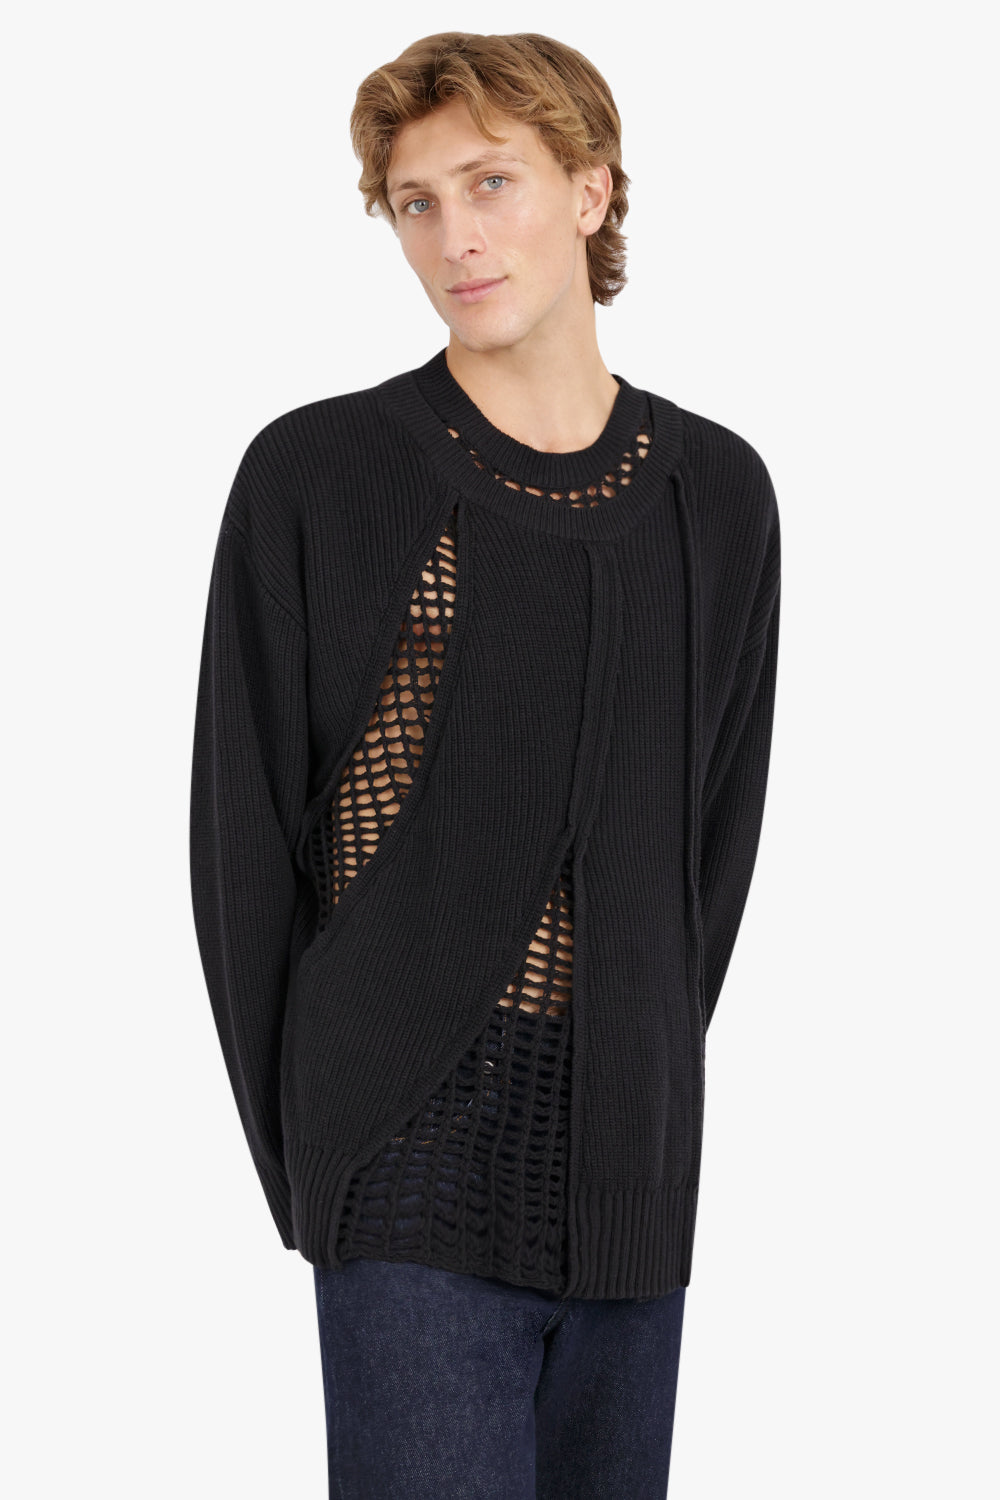 FENG CHEN WANG RTW 2 IN 1 JUMPER WITH MESH PANEL | BLACK